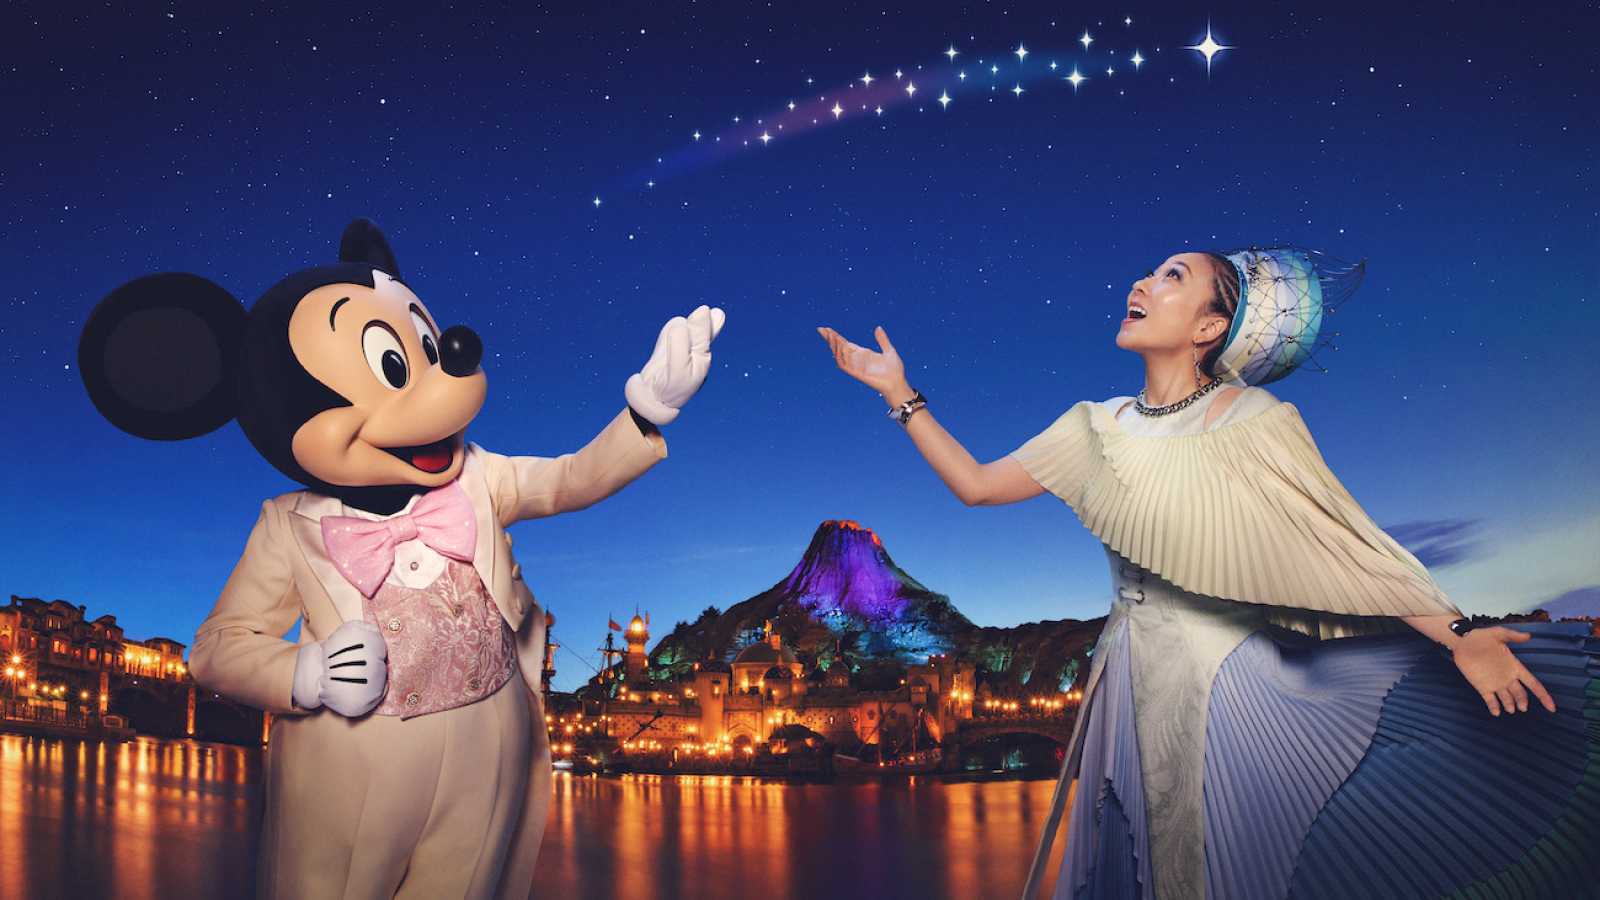 New Best-of Compilation from MISIA © Disney. All rights reserved.